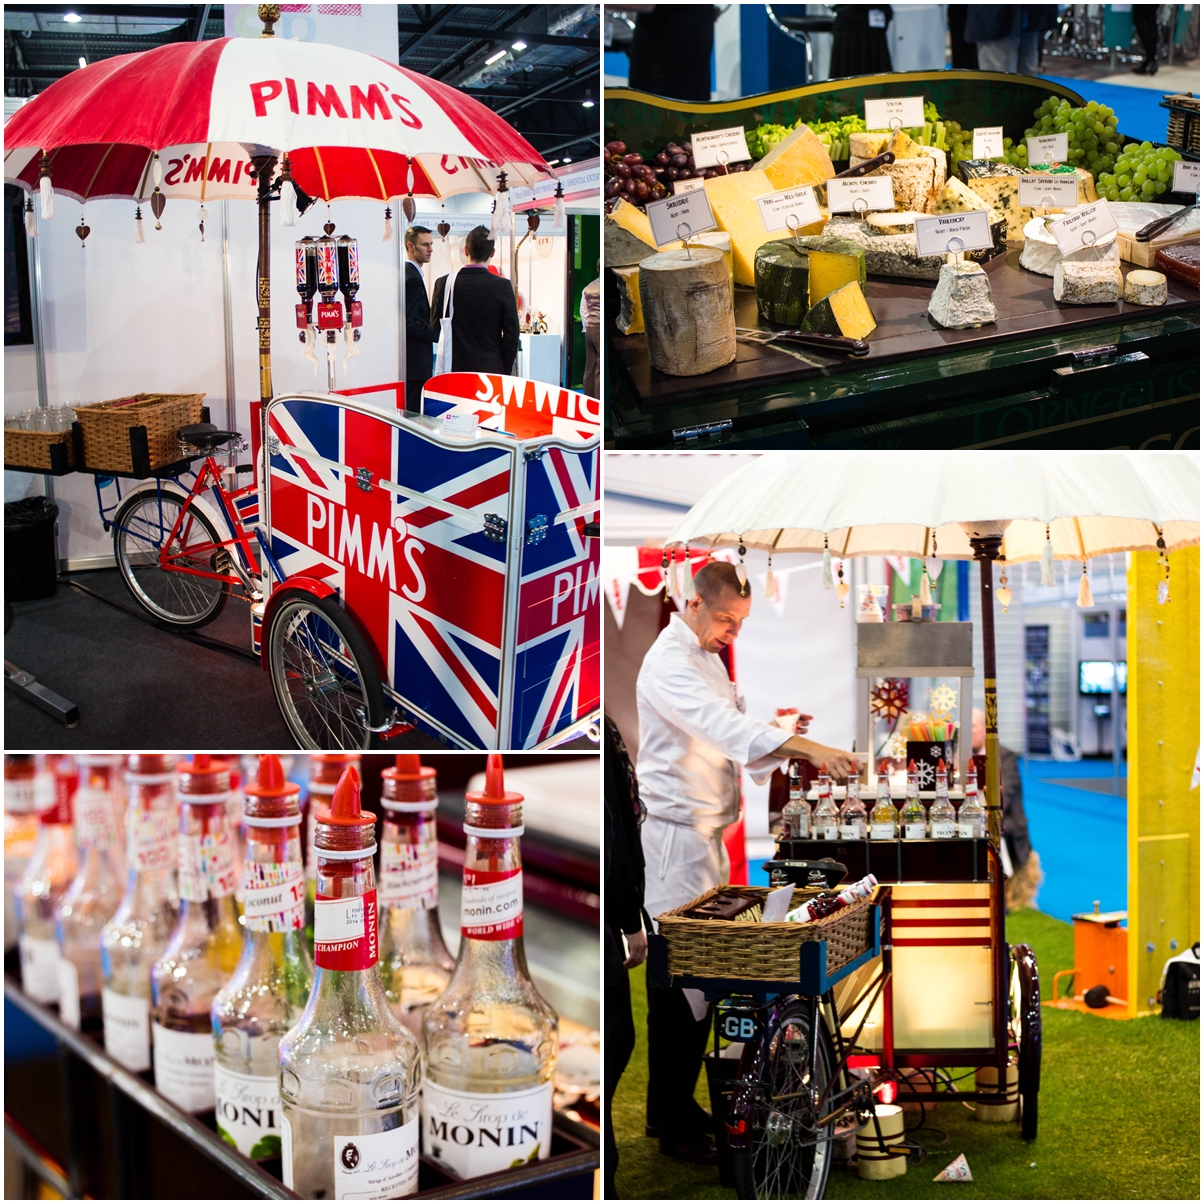 Cheese, Snowcone & Pimm’s Tricycles from Ideas Box